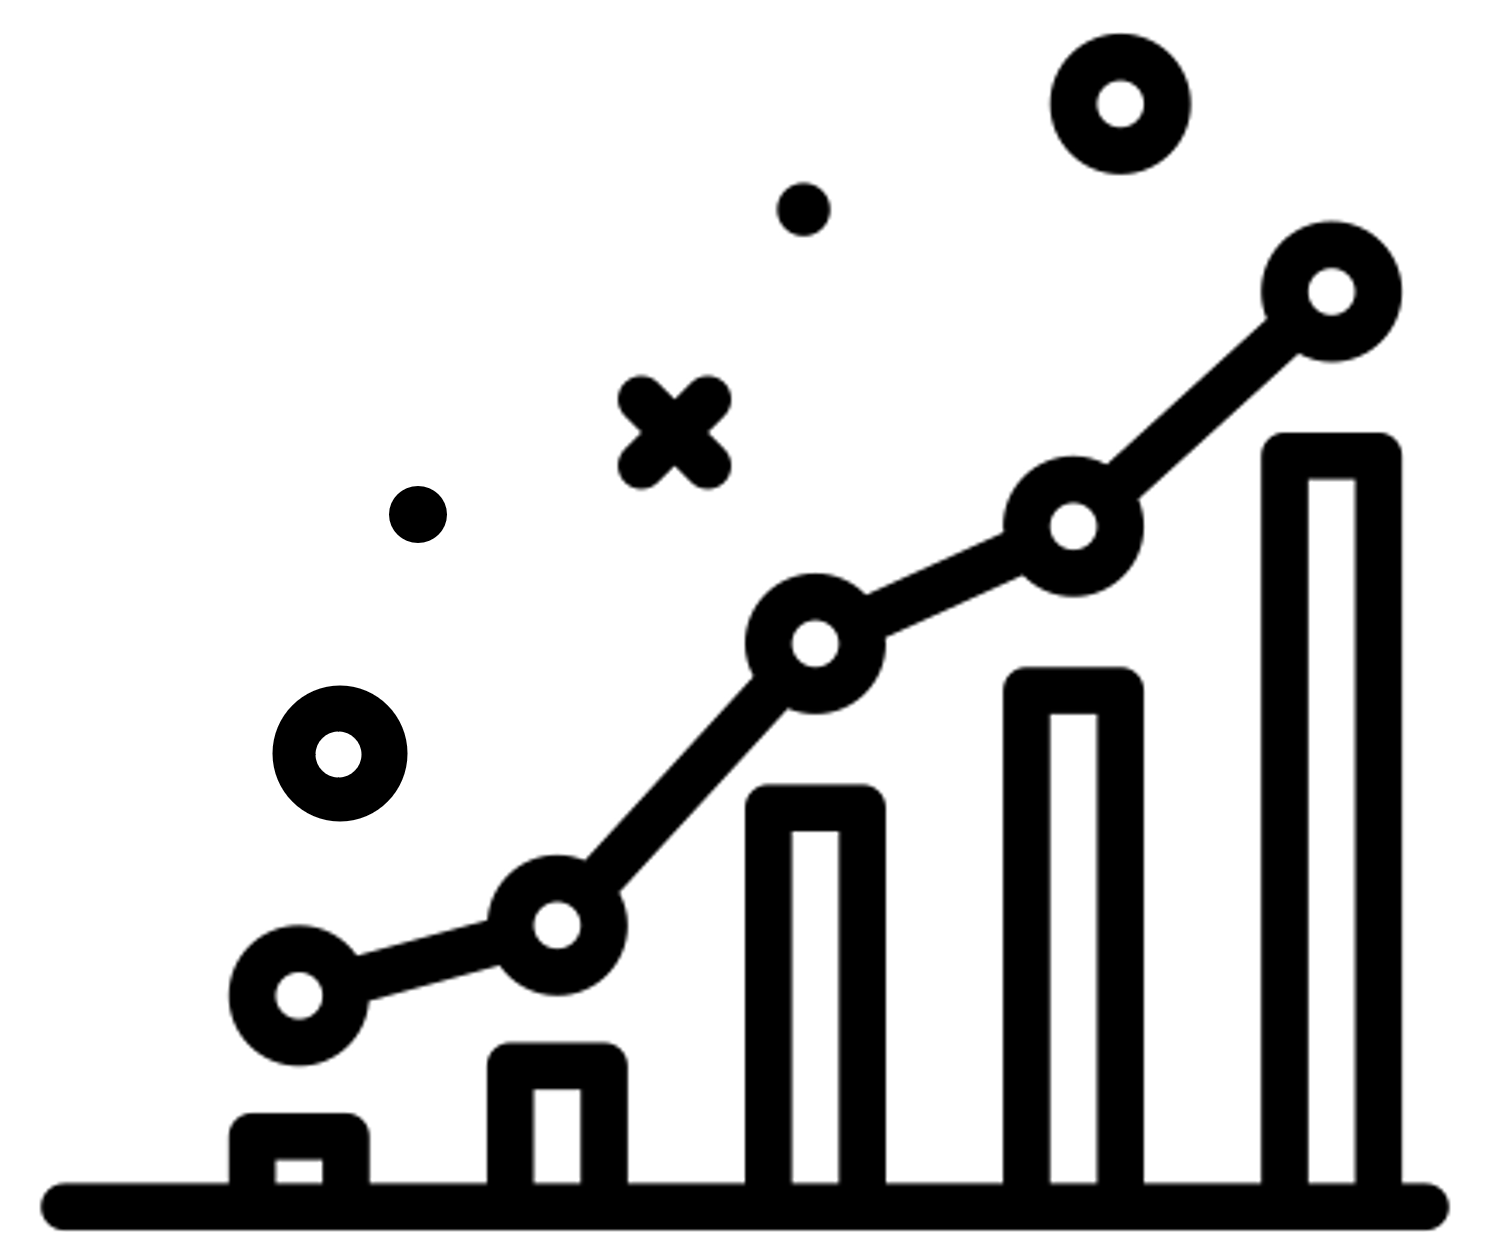 An example of a bar graph and line graph data visualization depicting an increasing trend.